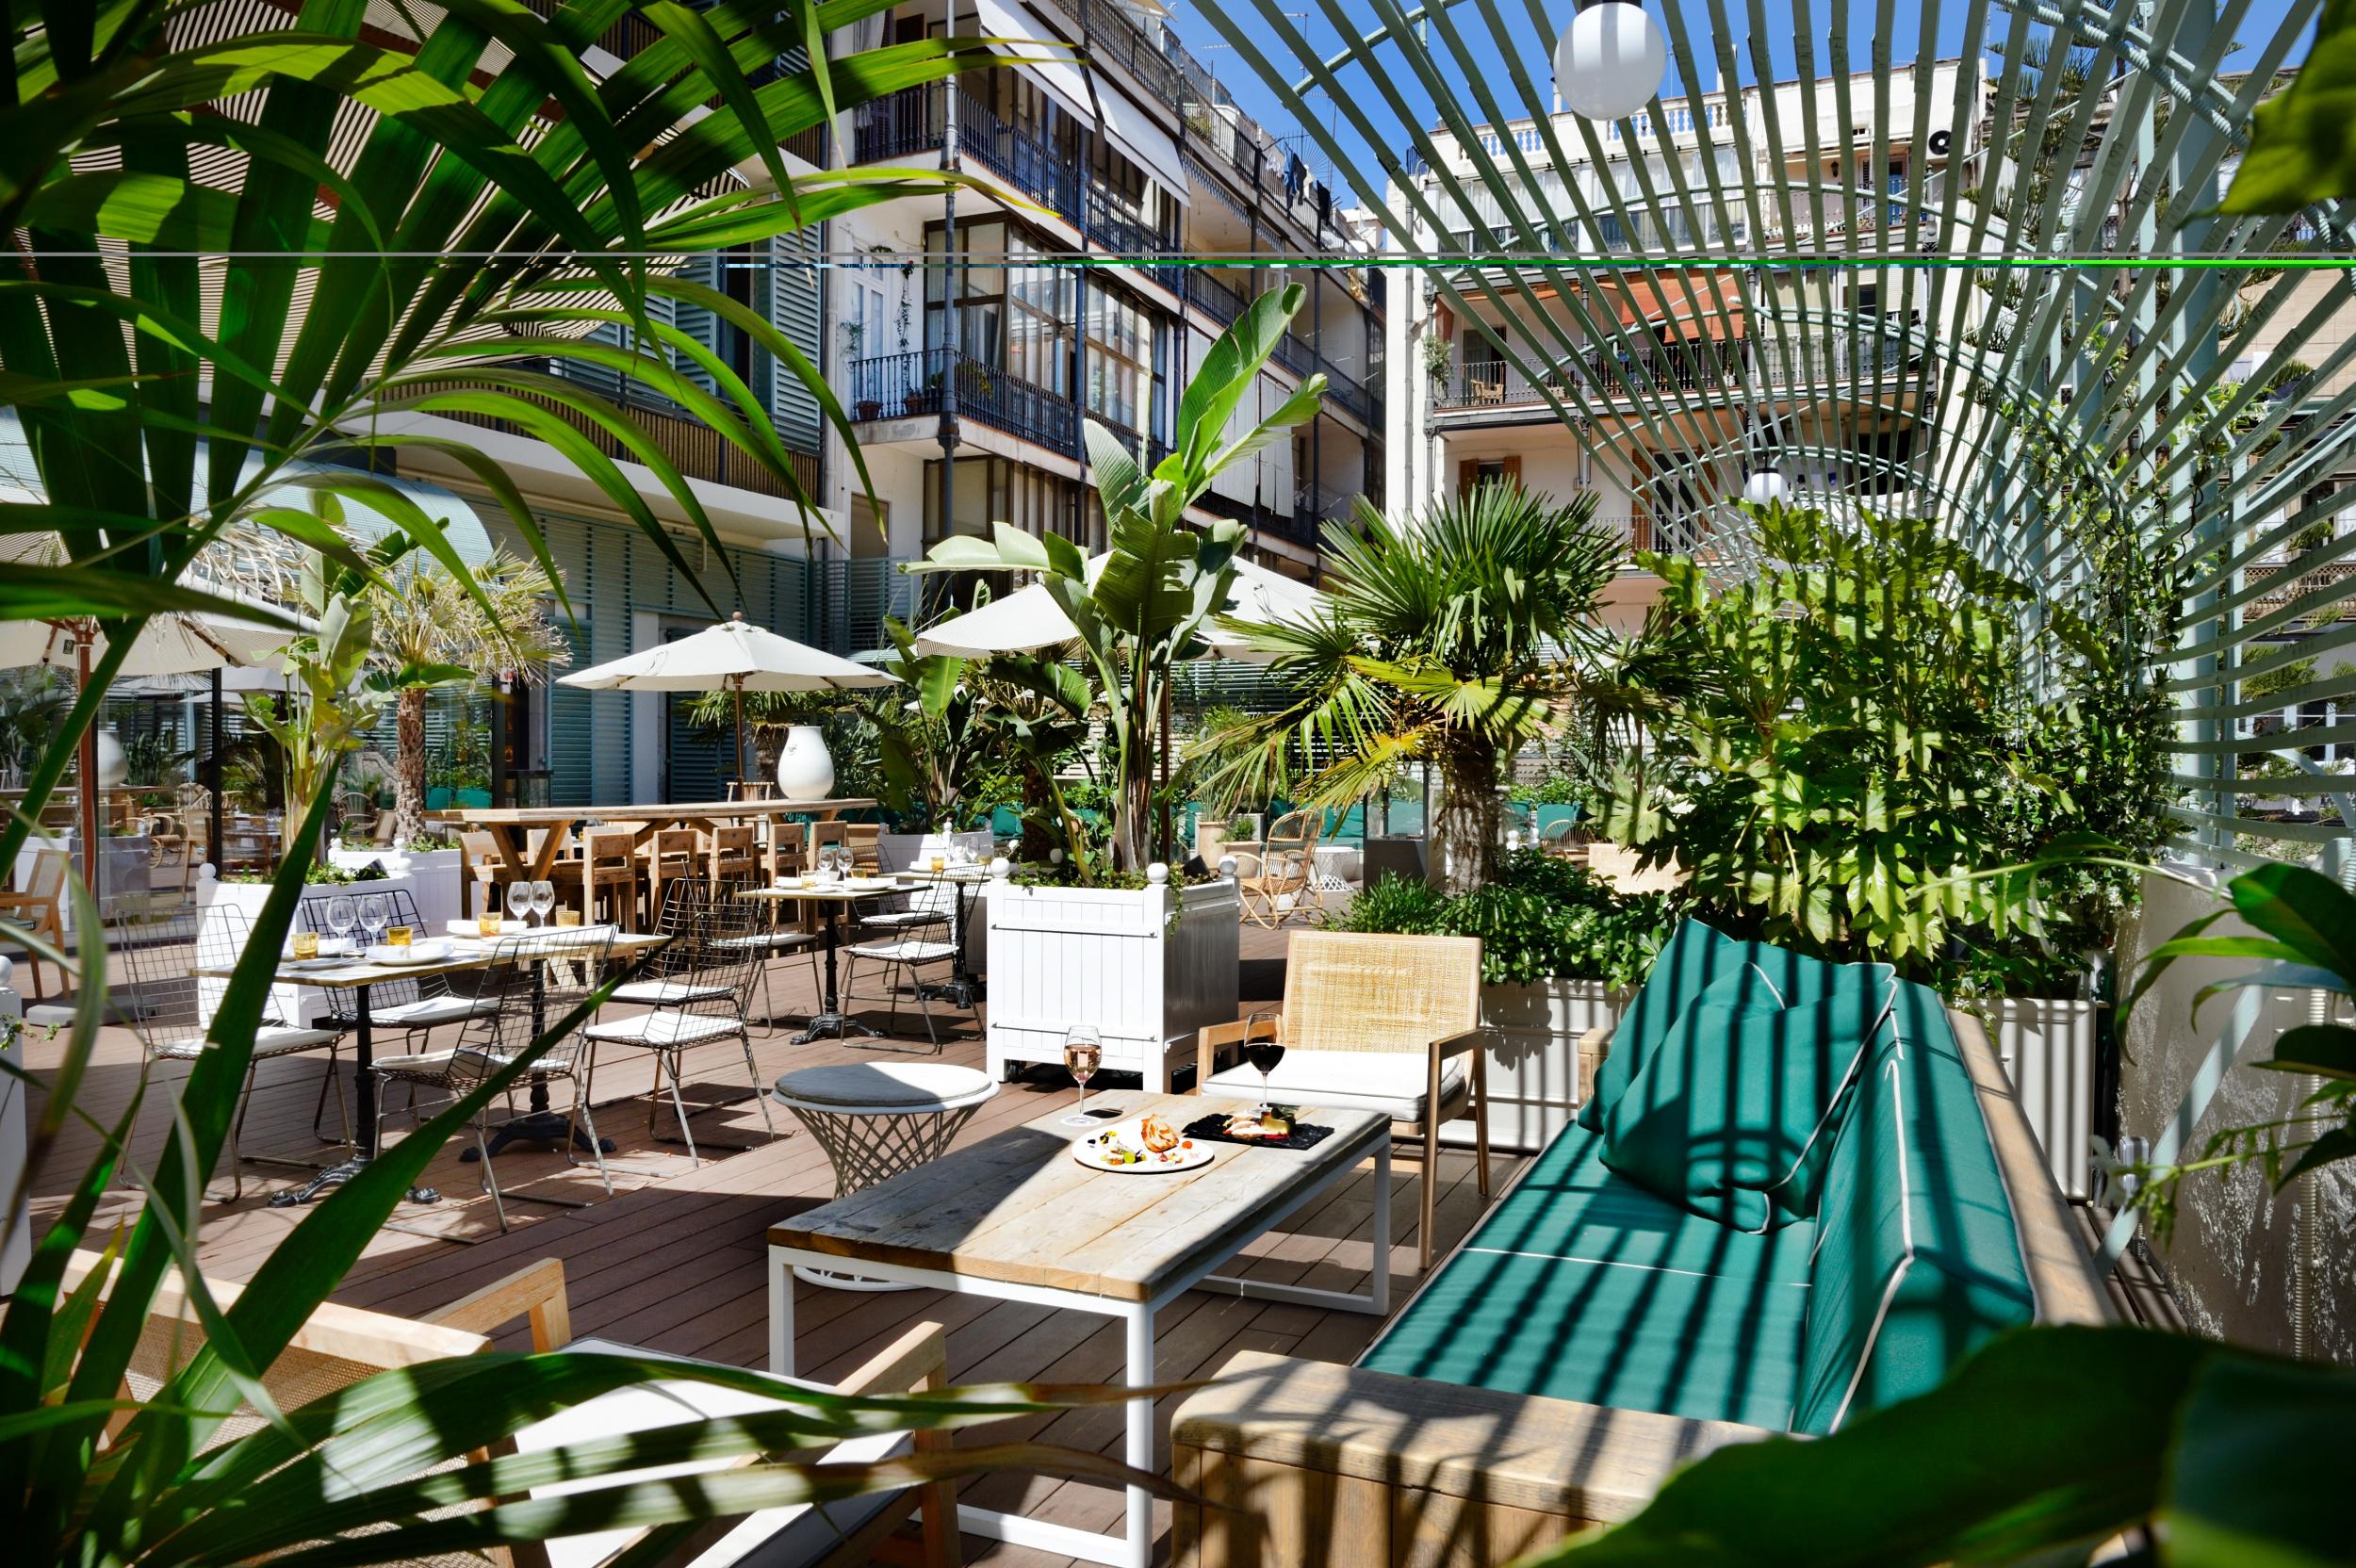 Catch some sun on Barcelona's Cotton House rooftop